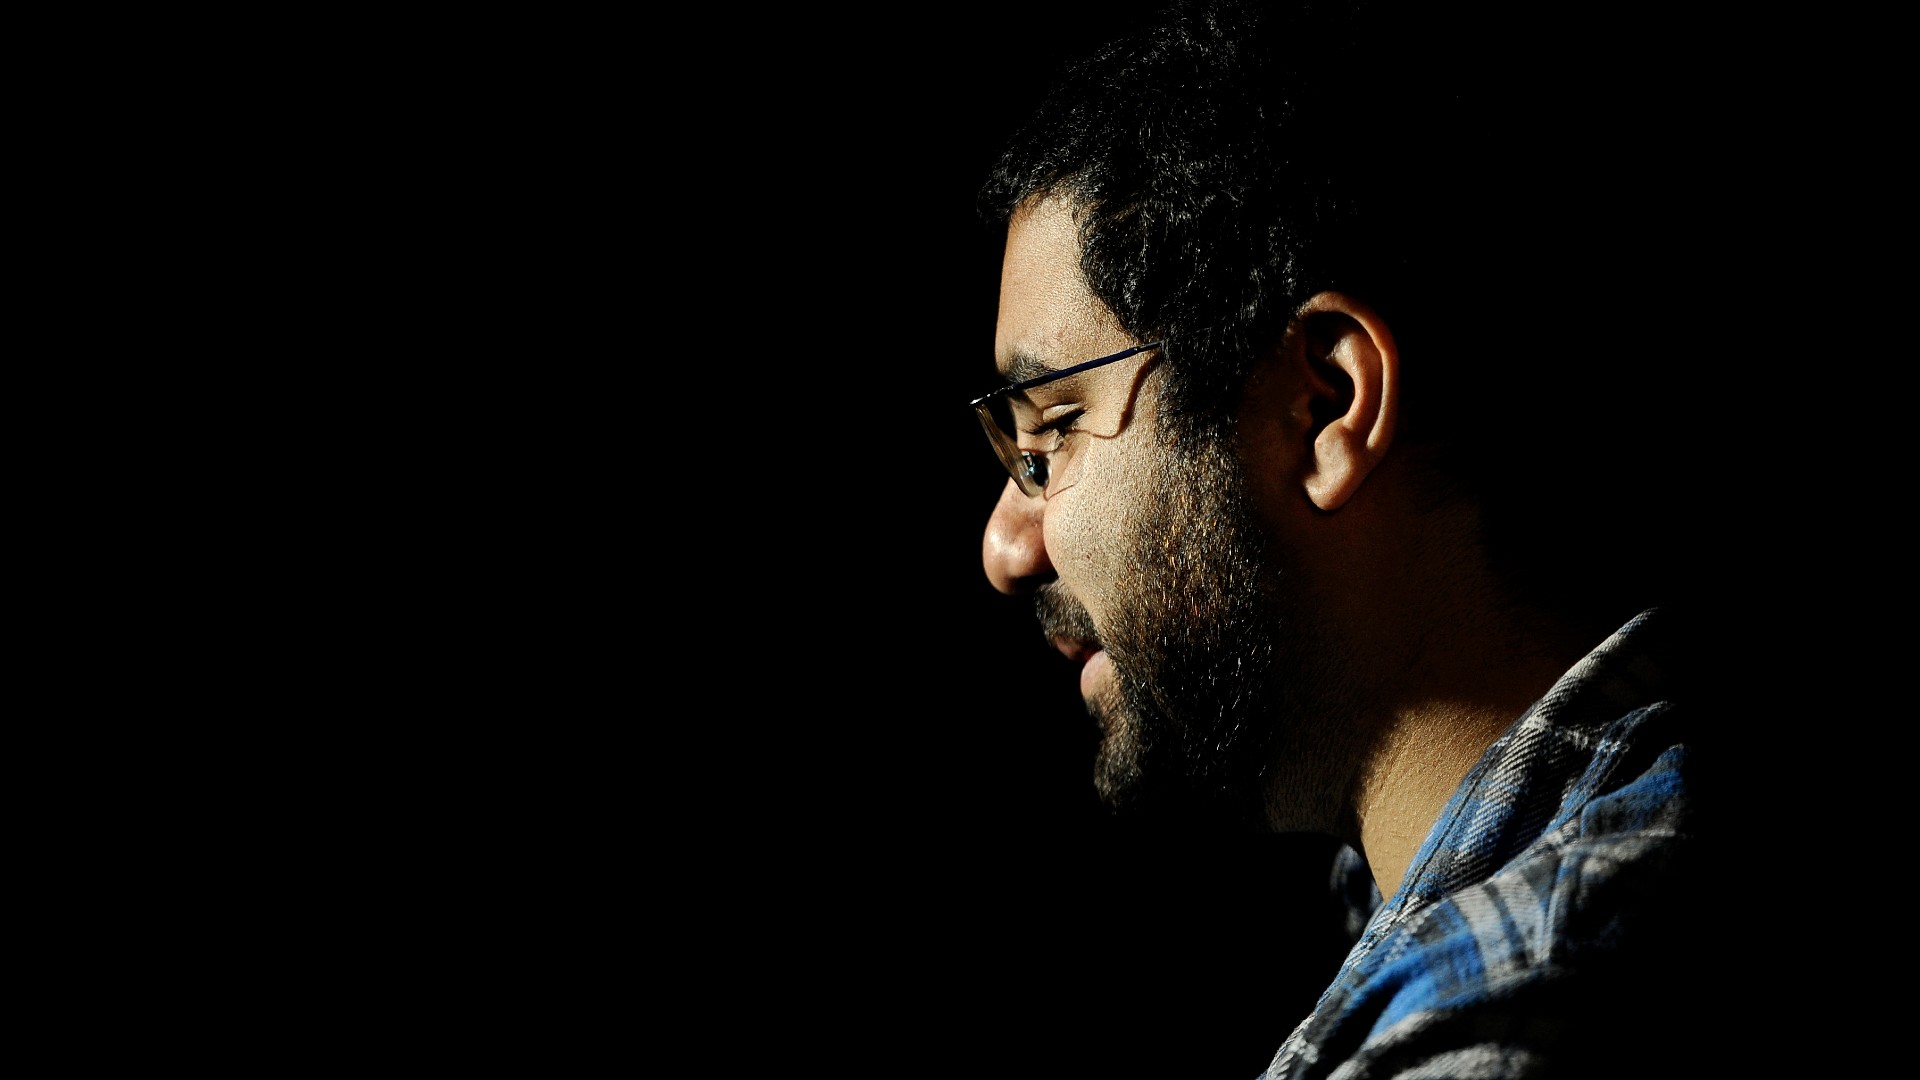 Egyptian blogger and activist Alaa Abdel Fattah gives a TV interview at his house in Cairo on December 26, 2011, 